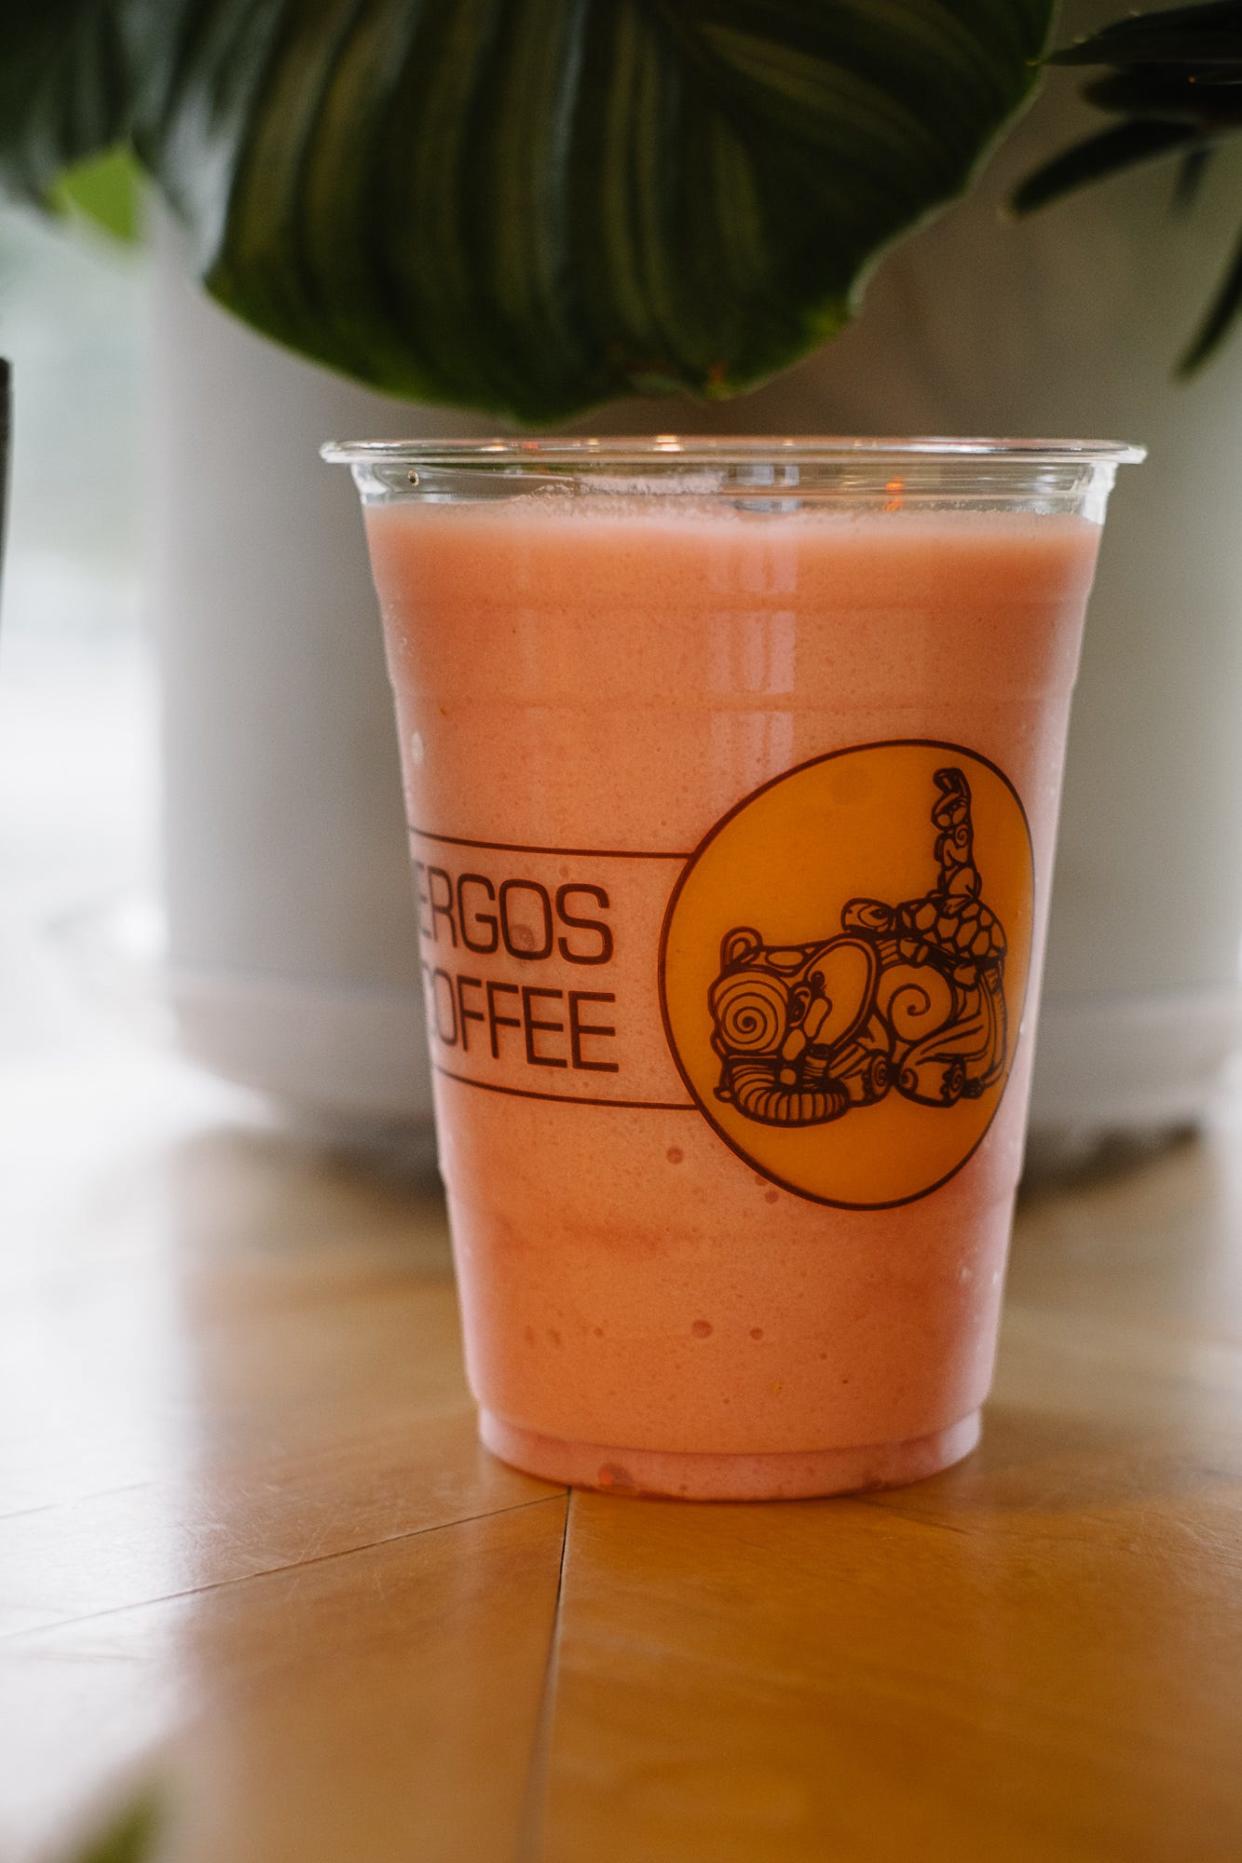 The Raspberry Smoothie at Sunergos Coffee is raspberry blended with non-fat yogurt or ice cream.